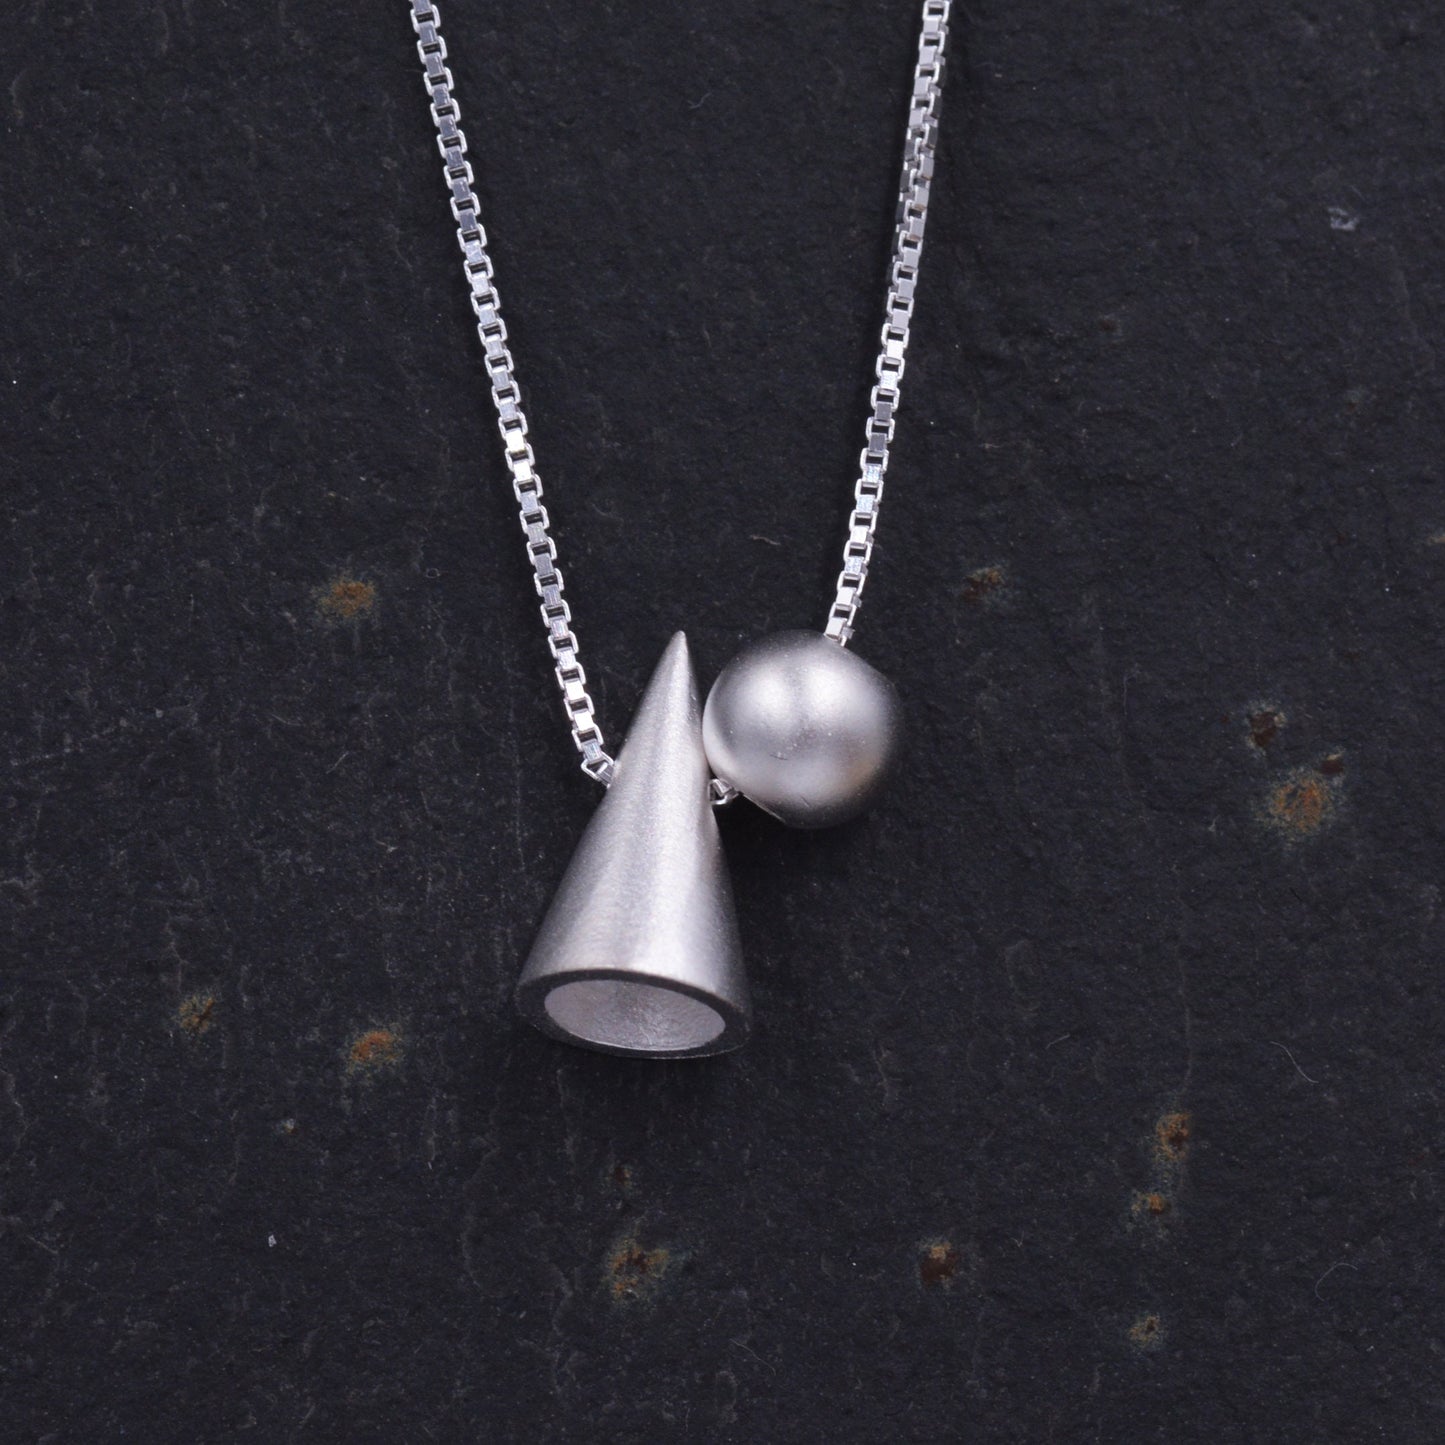 Sterling Silver Geometric Ball and Cone Pendant Necklace, Minimalist, Satin Finish M23